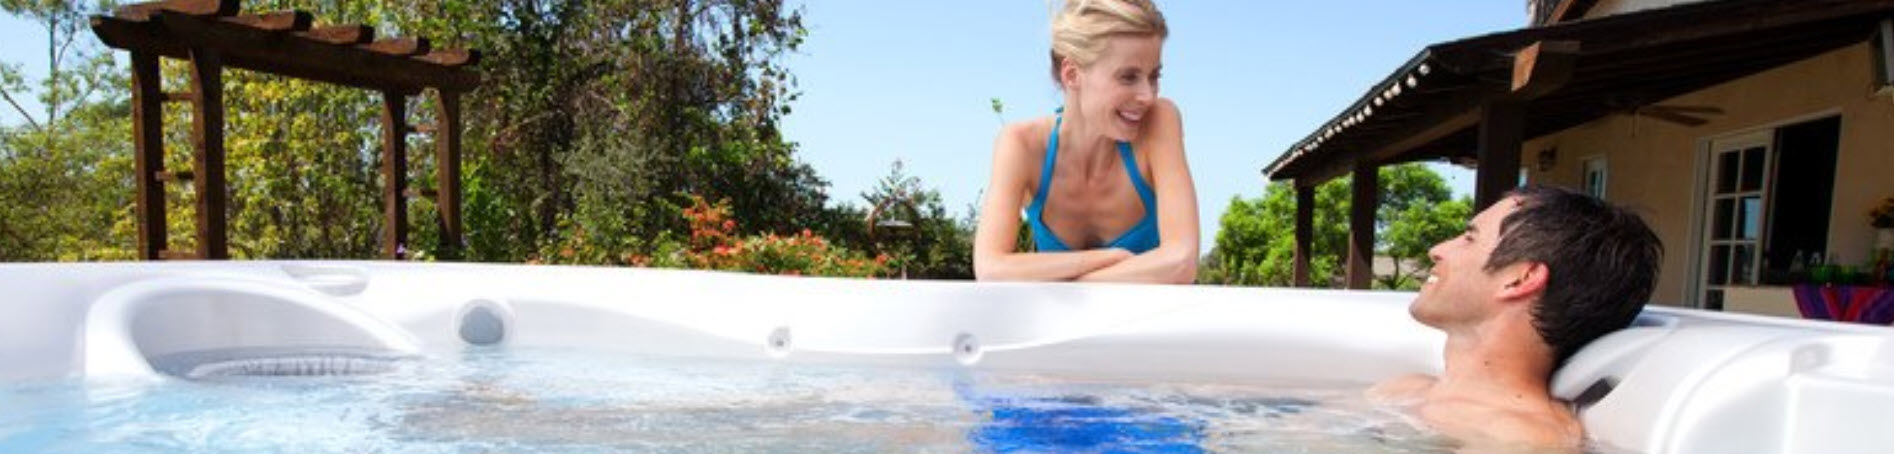 Keep the Family Smiling with a Luxurious Spa, Hot Tubs for Sale Oconomowoc